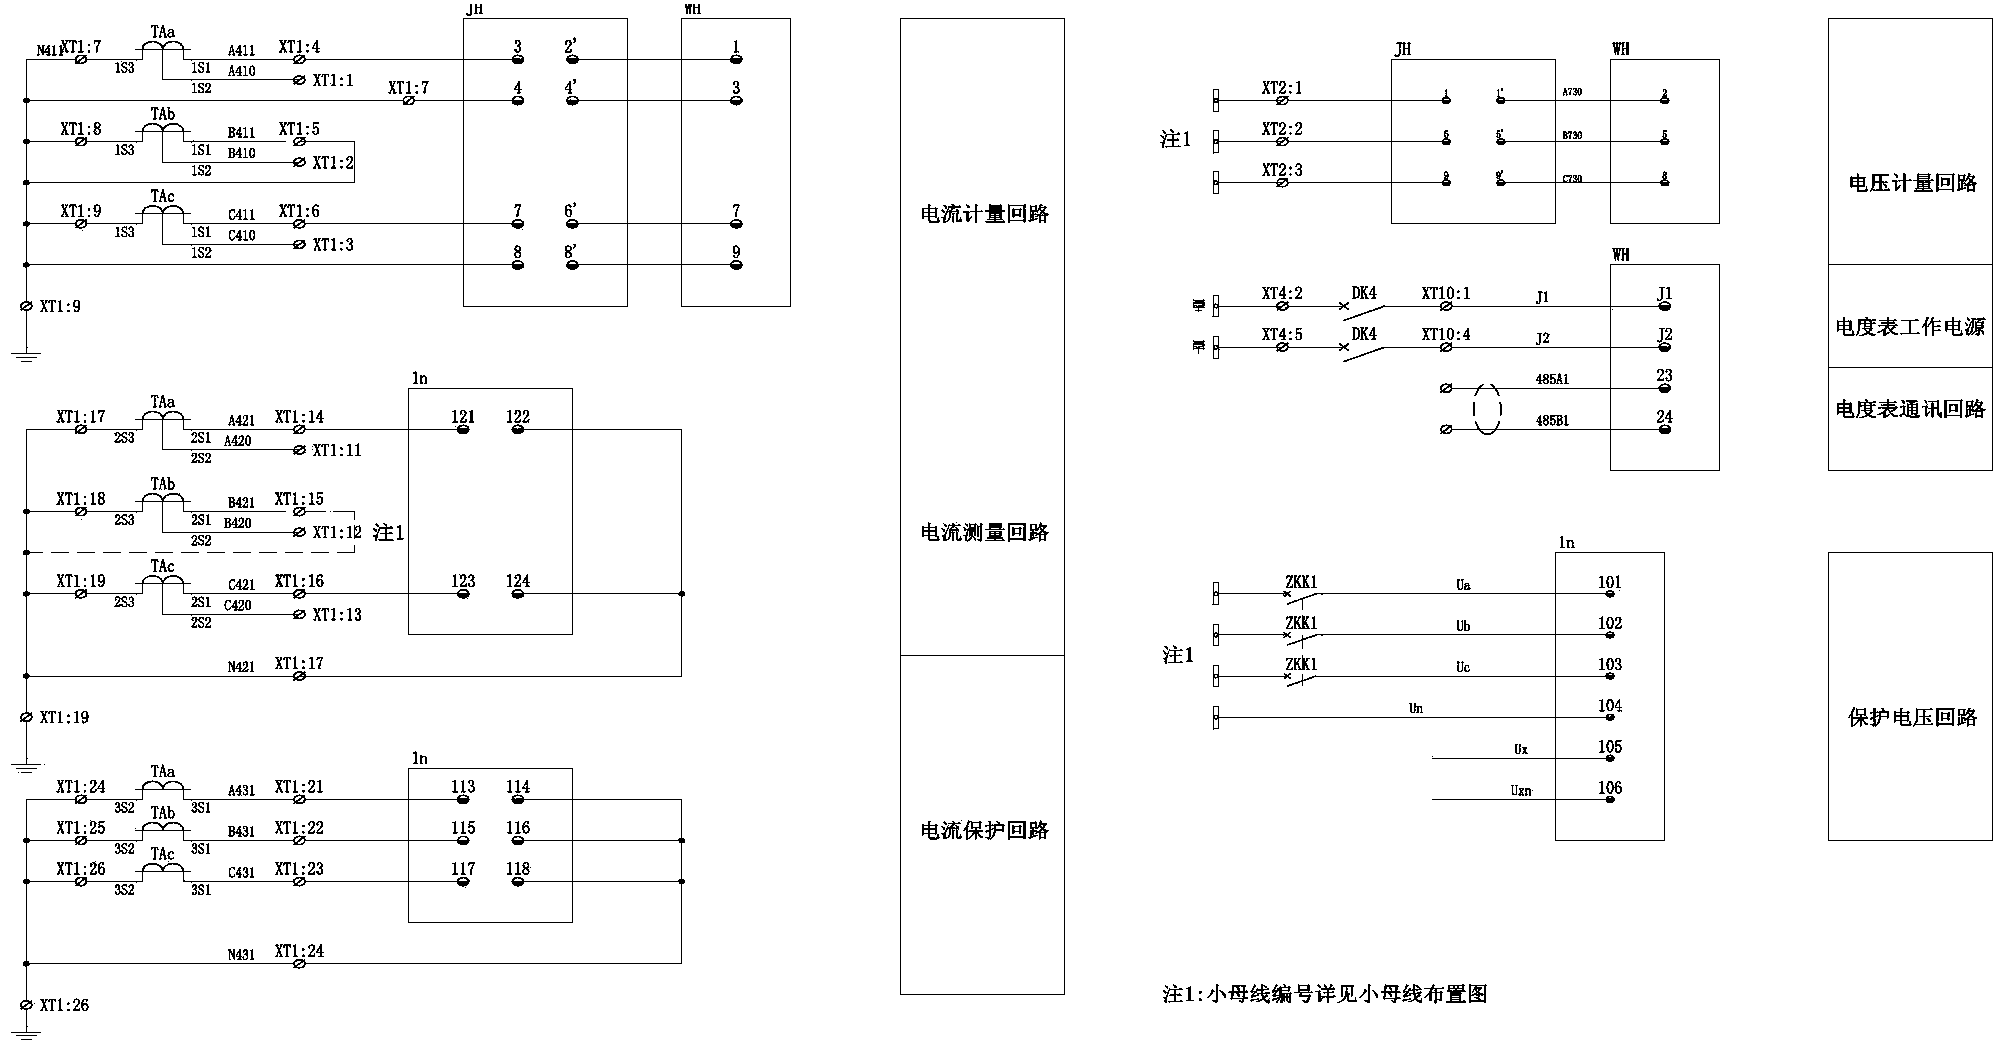 Automatic generation method of secondary electrical schematic diagrams based on Auto CAD